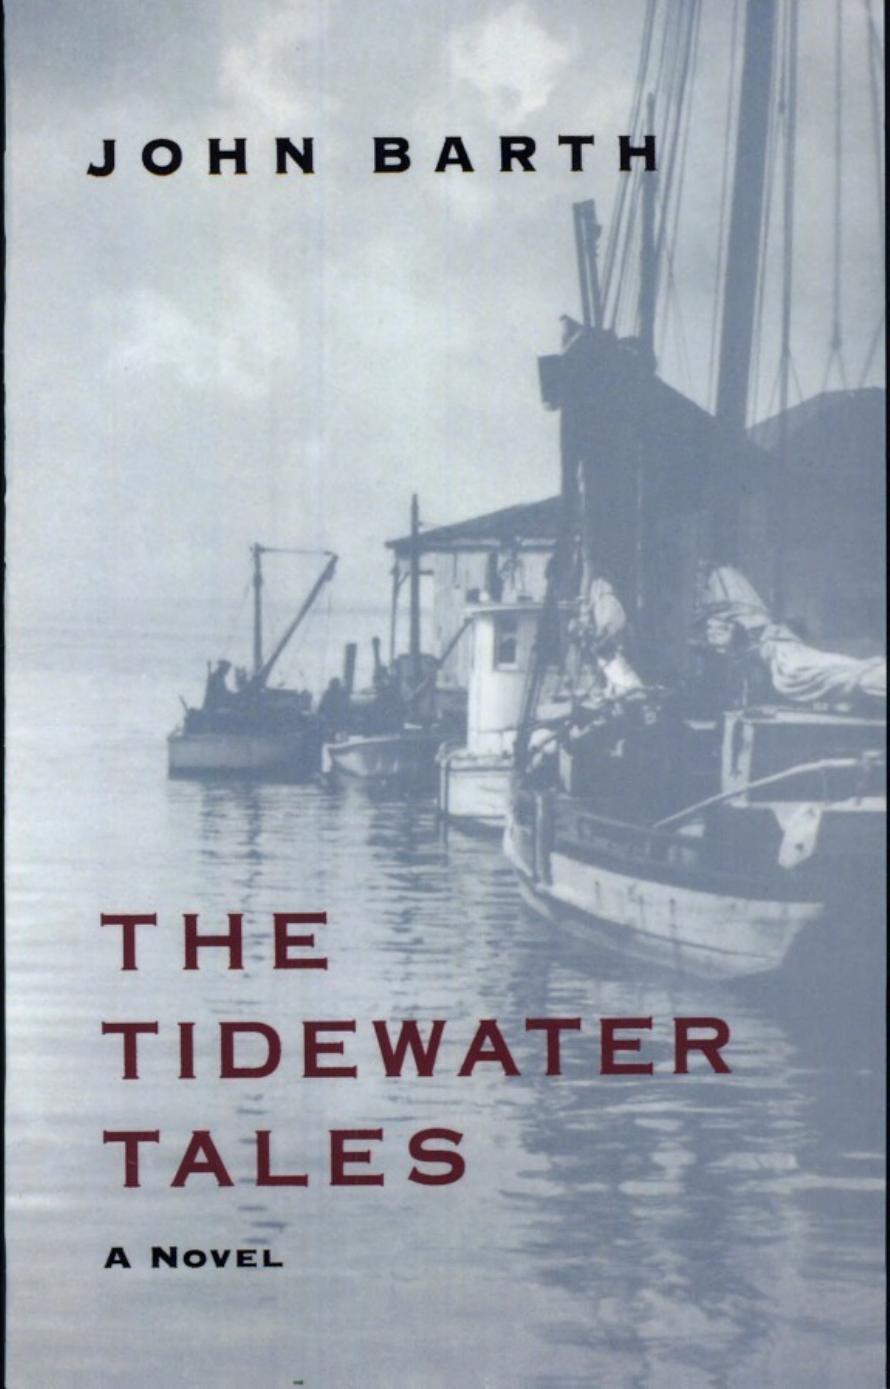 The Tidewater Tales by John Barth